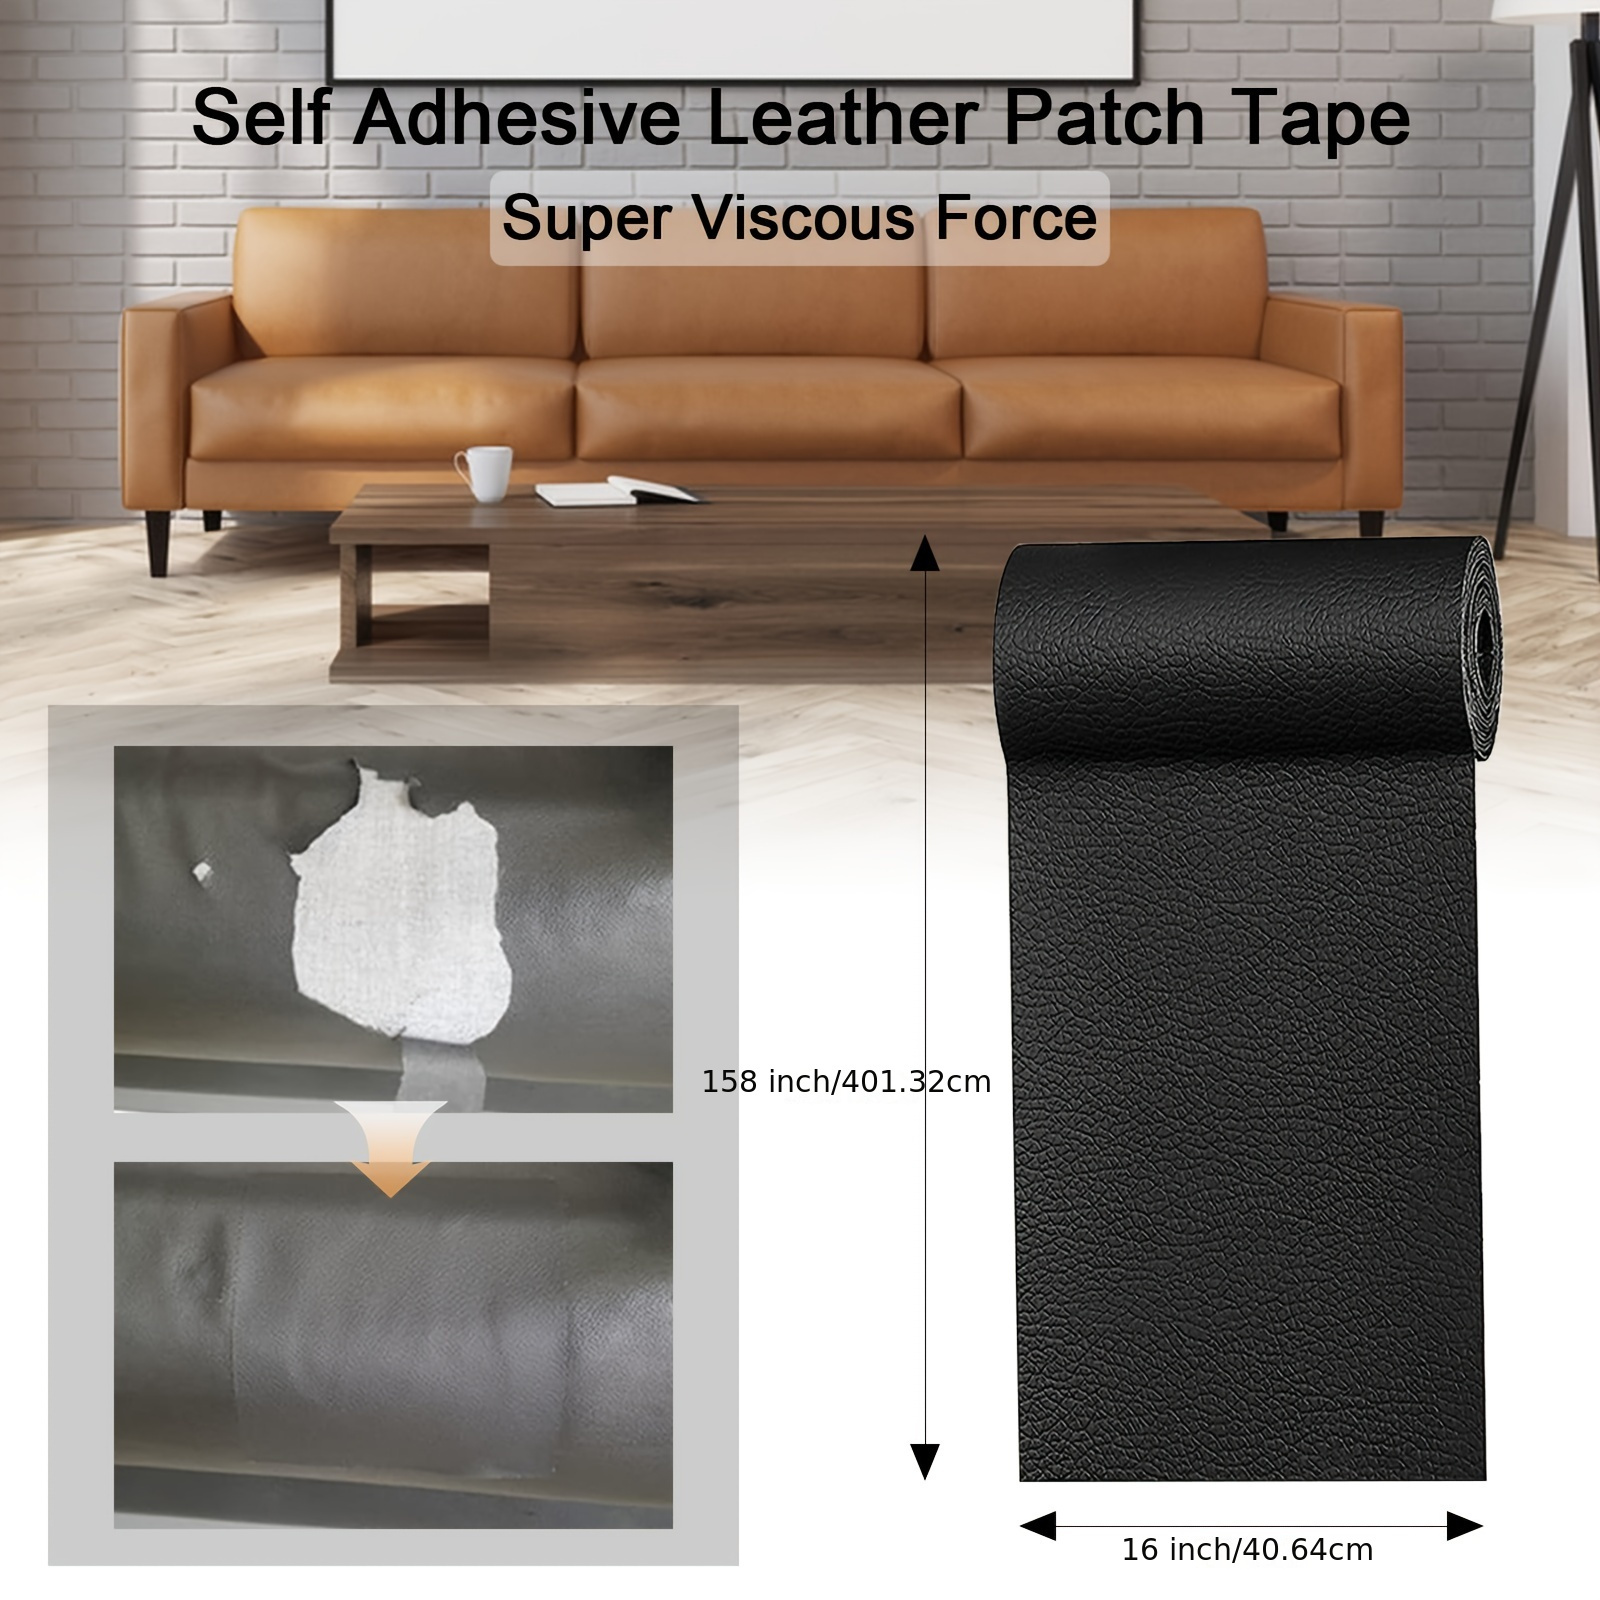 Onine Leather Tape 3x60 inch Self-Adhesive Leather Repair Patch for Sofas, Couch, Furniture, Drivers Seat(Dark Brown)